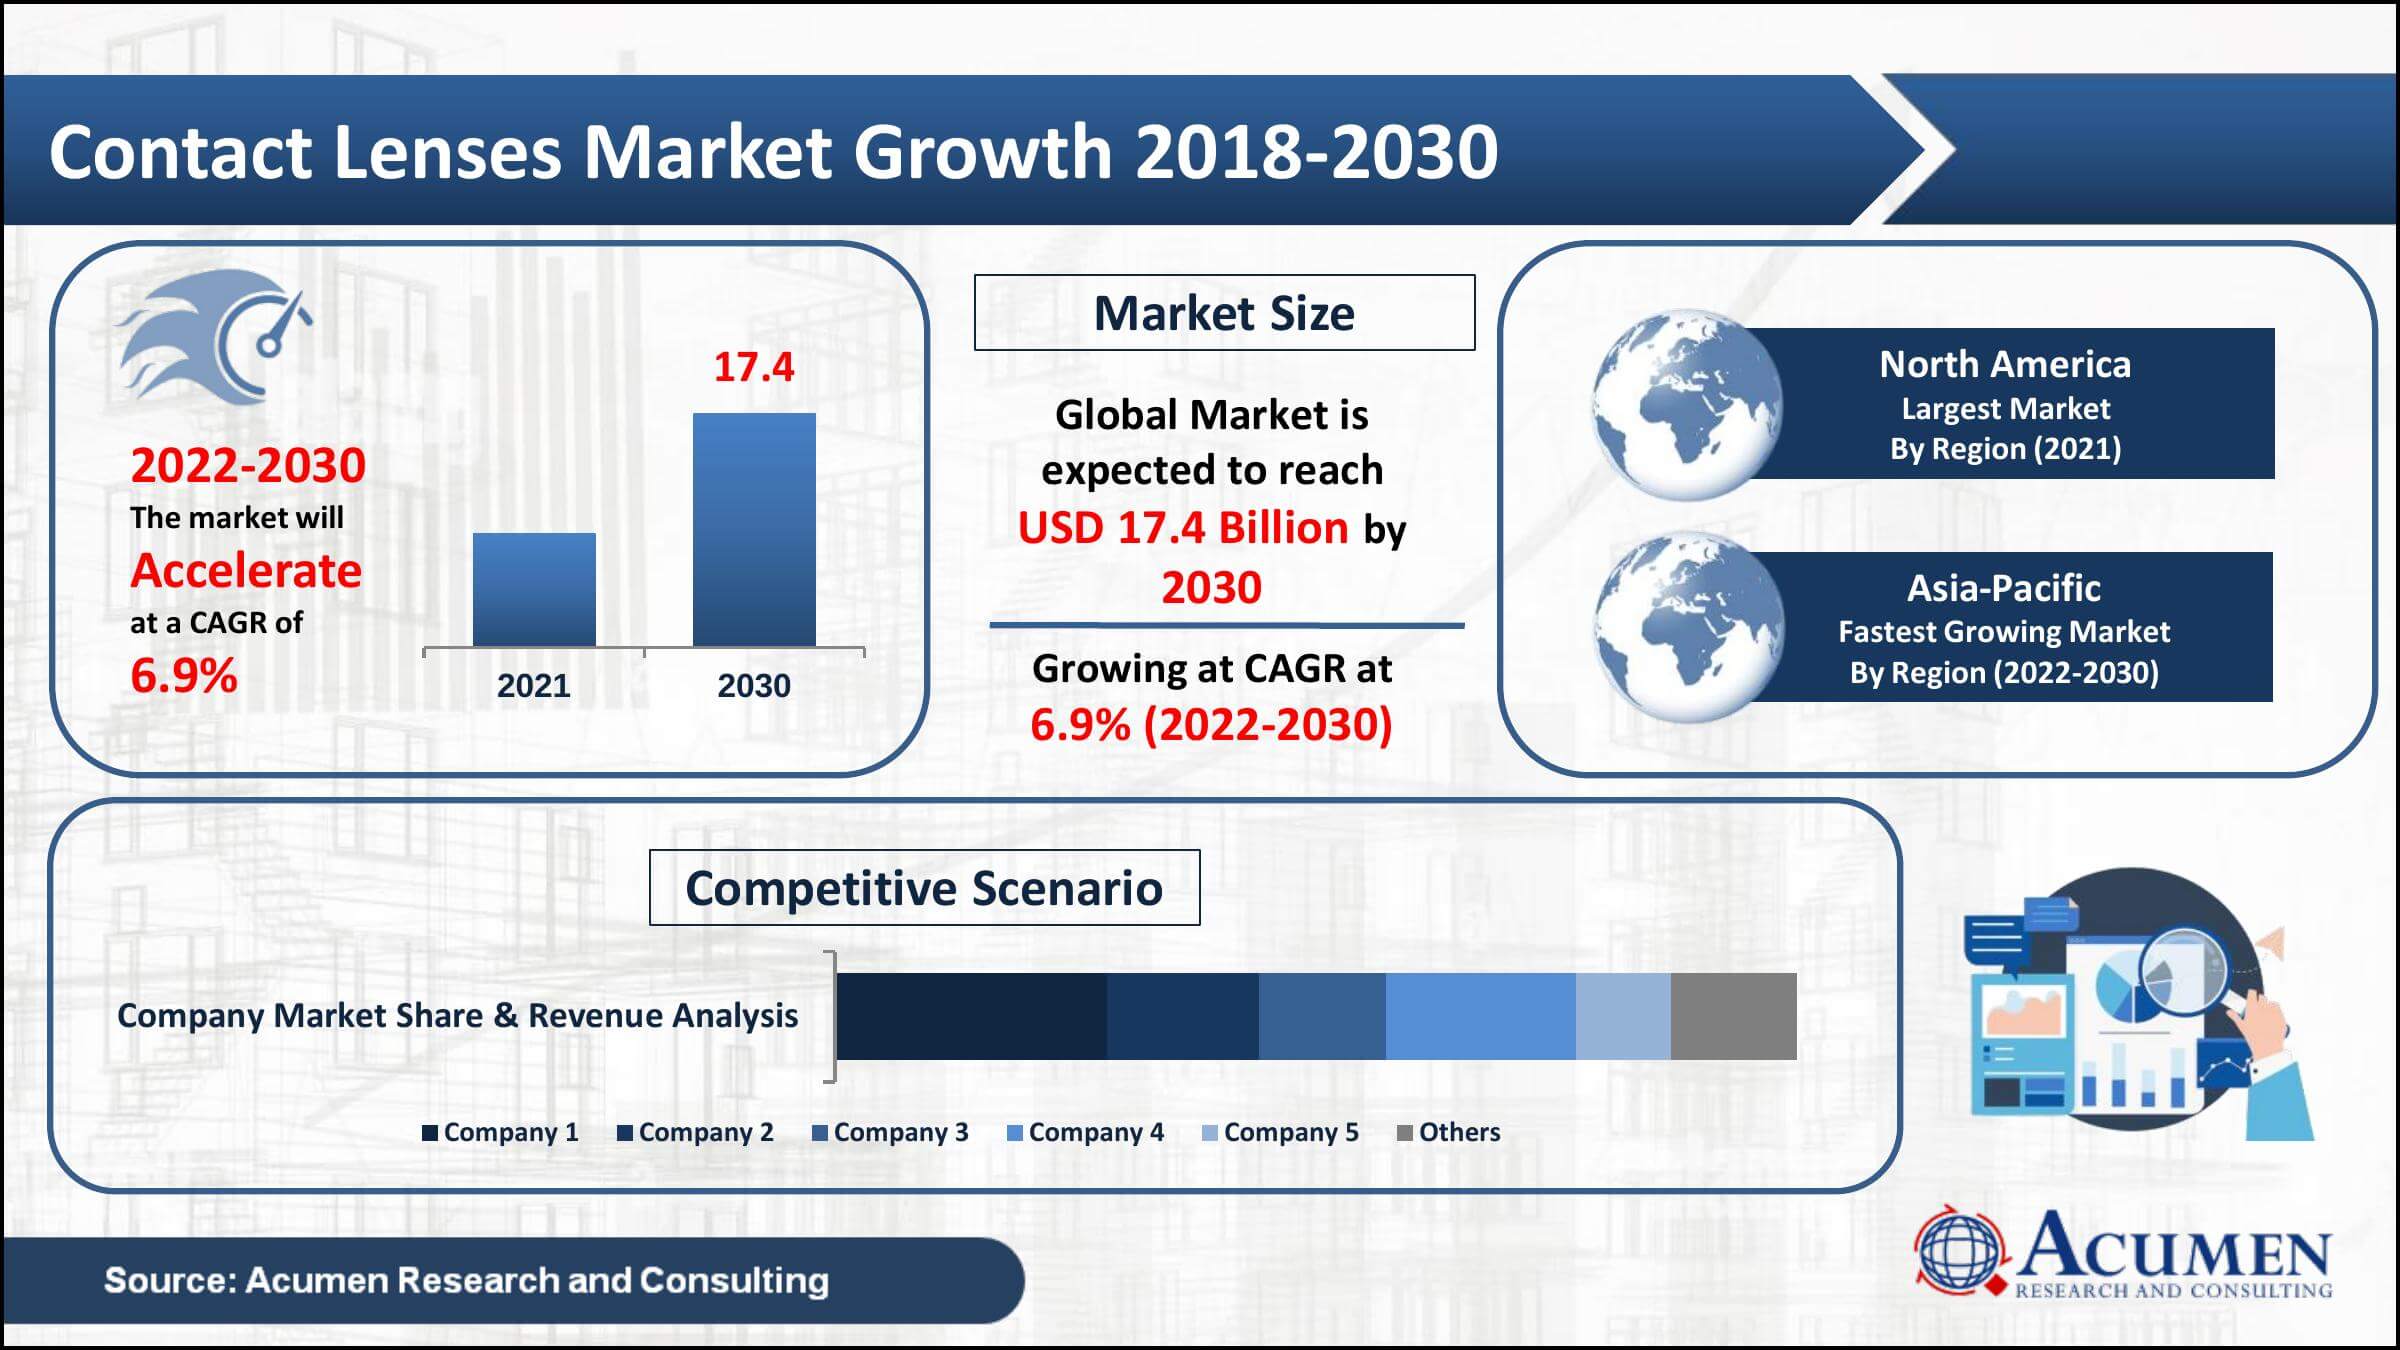 Global contact lenses market value was worth USD 9.6 Billion in 2021, with a 6.9% CAGR from 2022 to 2030